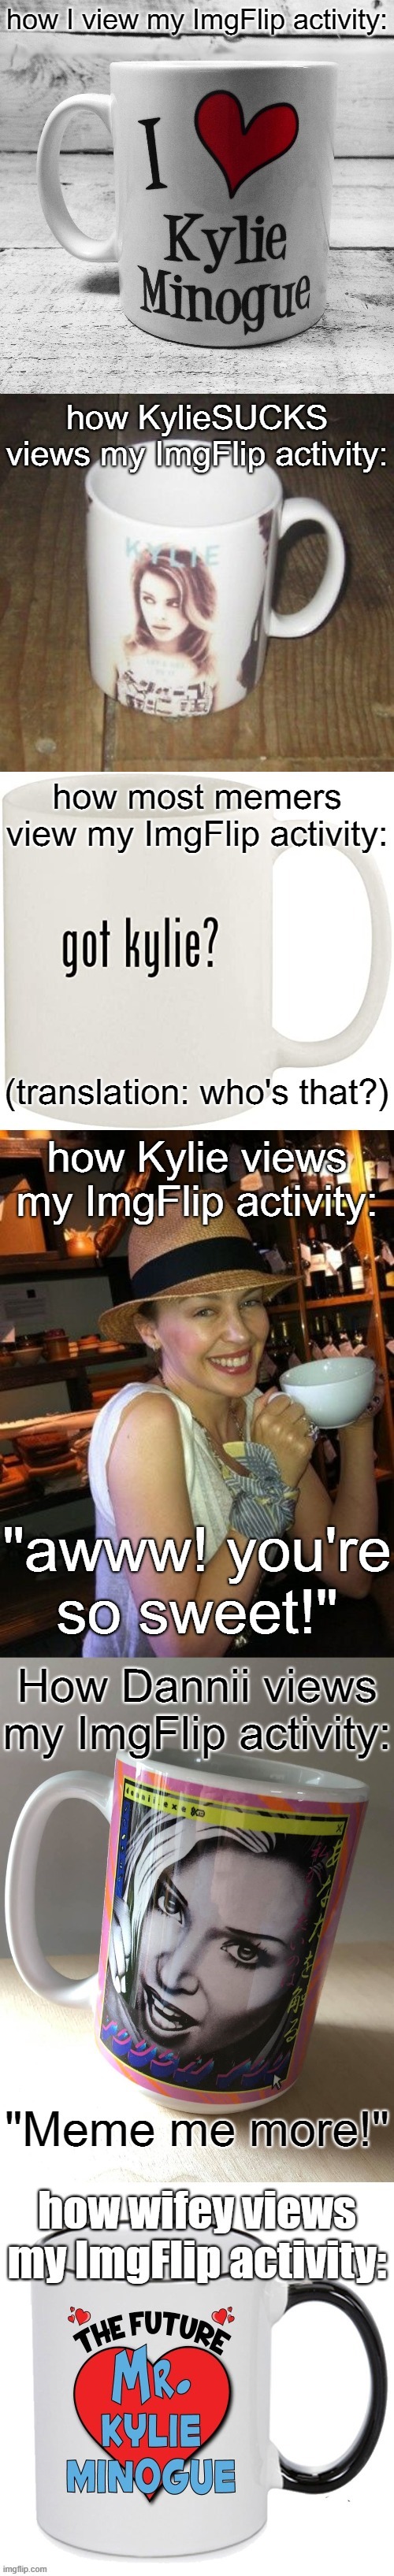 A primer in KylieFan/KylieAlt_89 lore | image tagged in the daily struggle imgflip edition,first world imgflip problems,imgflip humor,imgflipper,imgflip community,memes about memeing | made w/ Imgflip meme maker